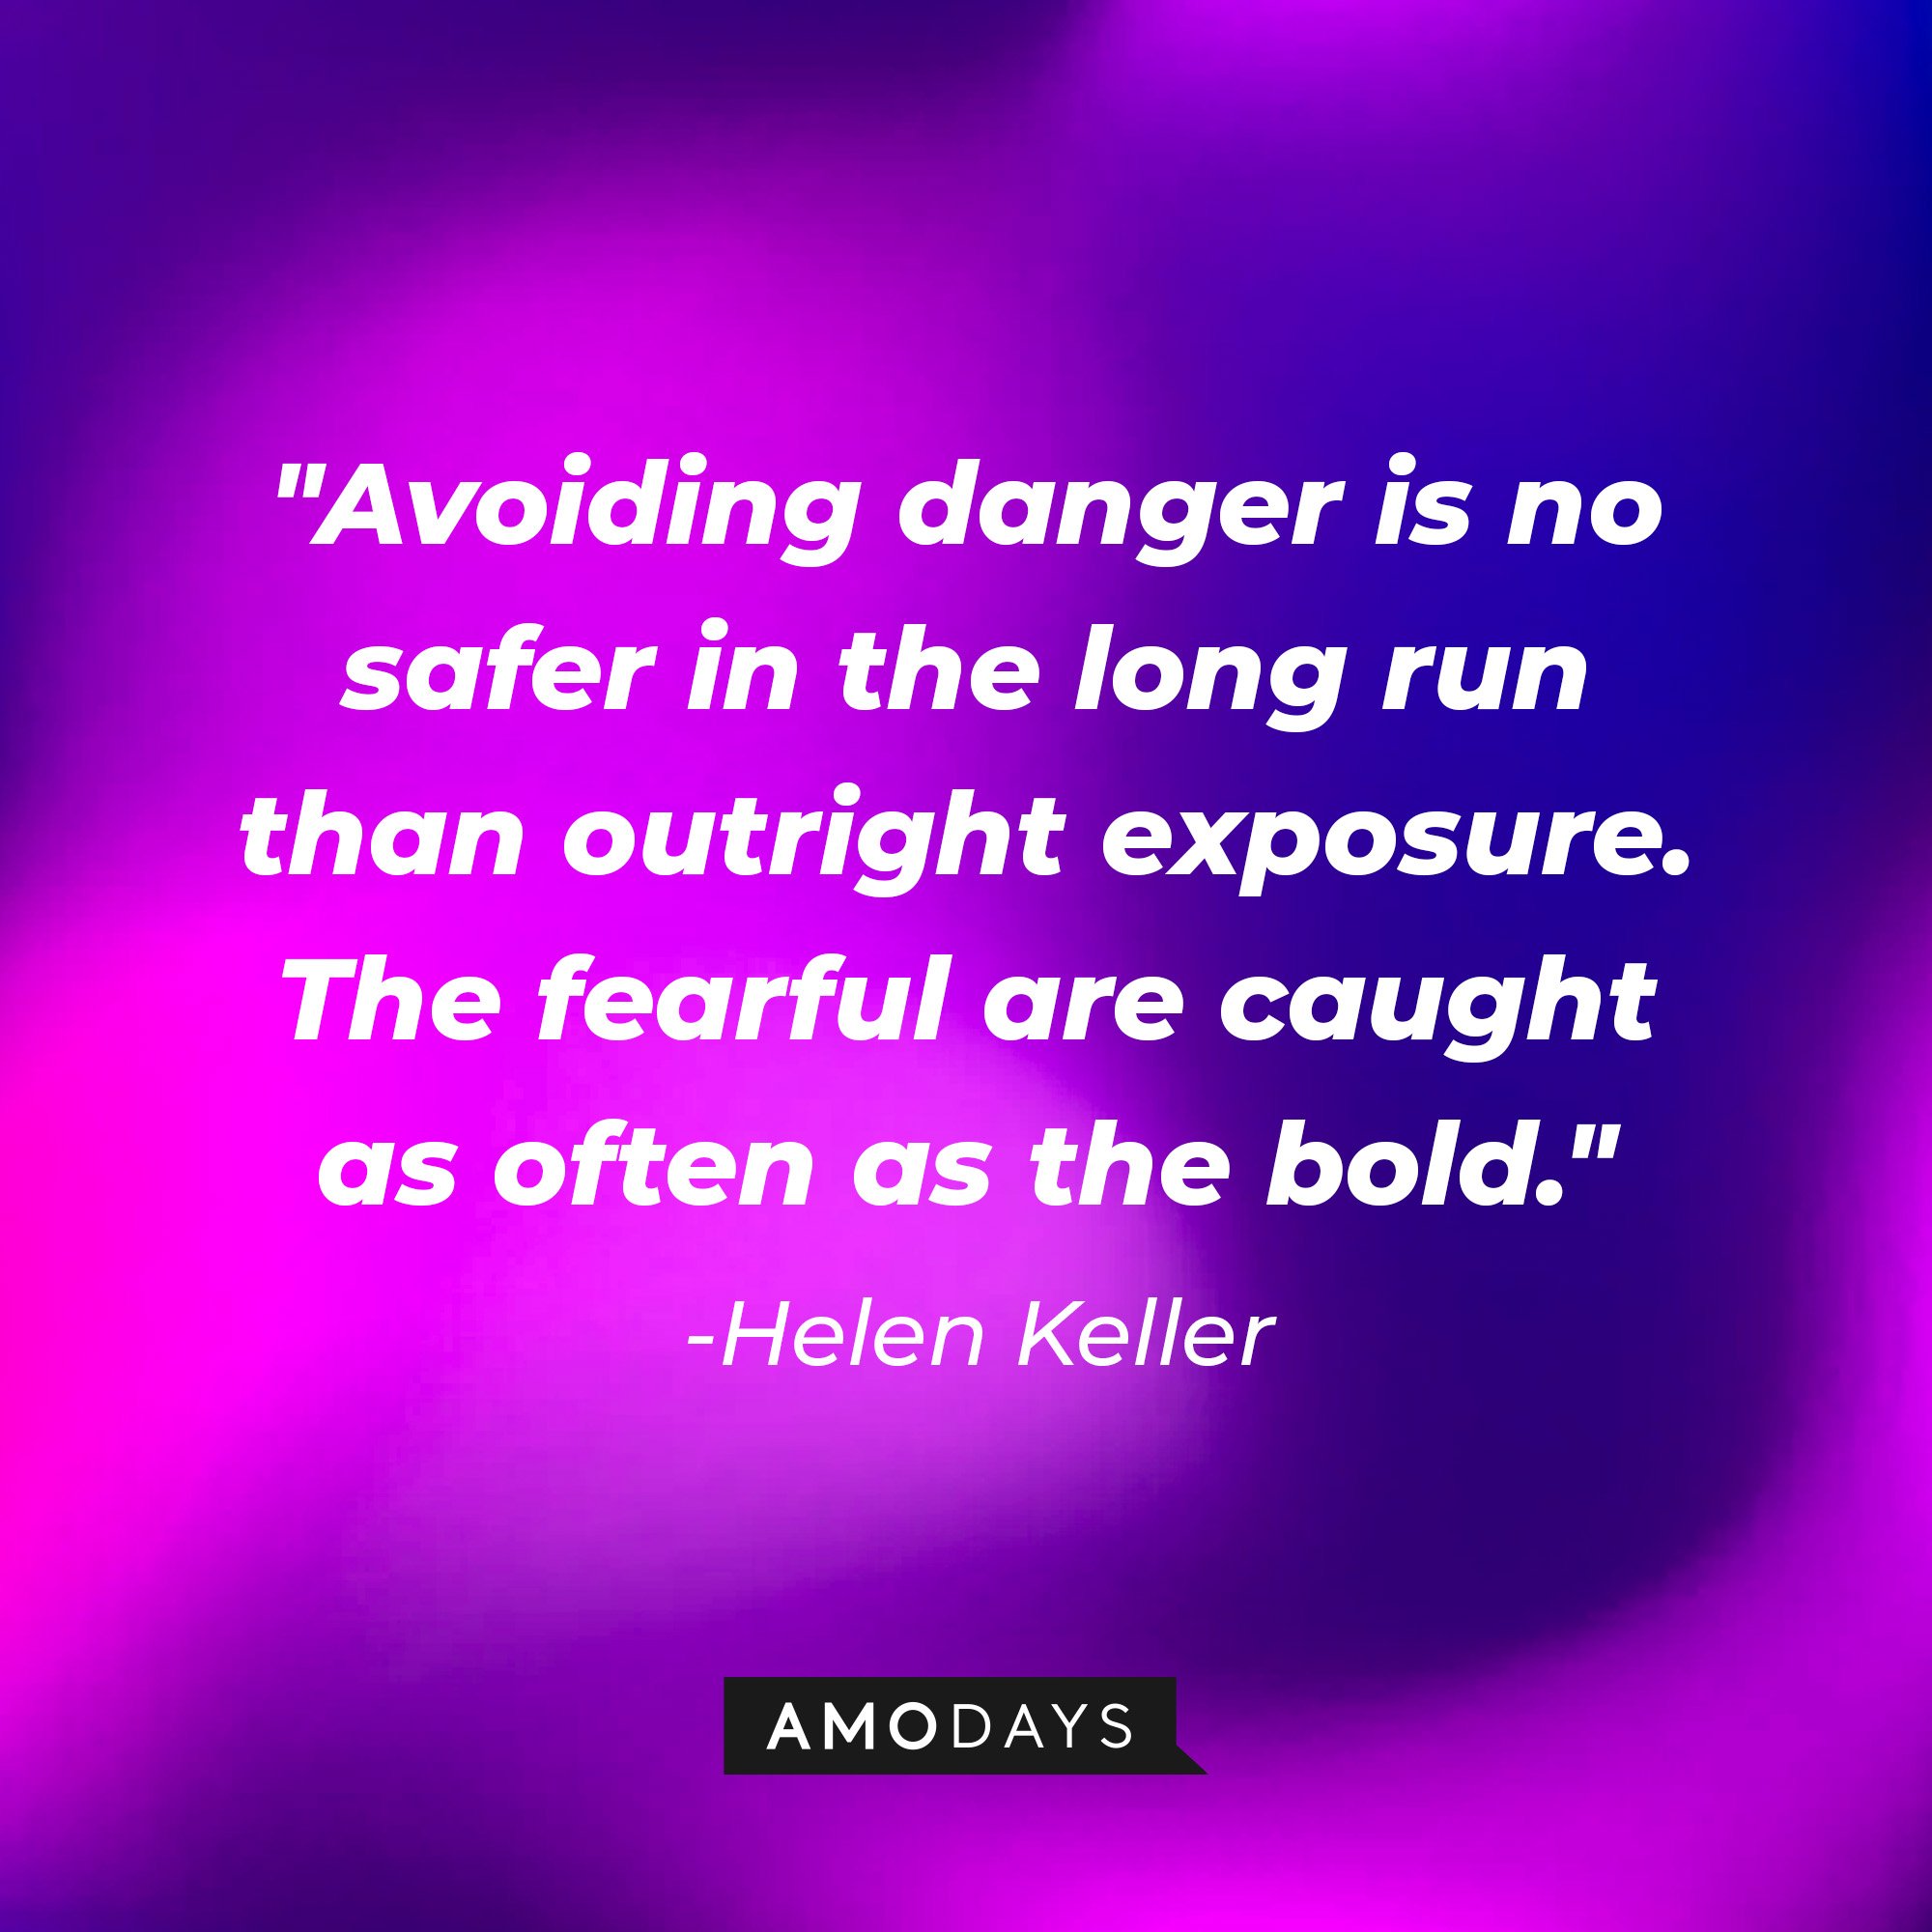 Helen Kellers’ quote: "Avoiding danger is no safer in the long run than outright exposure. The fearful are caught as often as the bold." | Image: Amodays